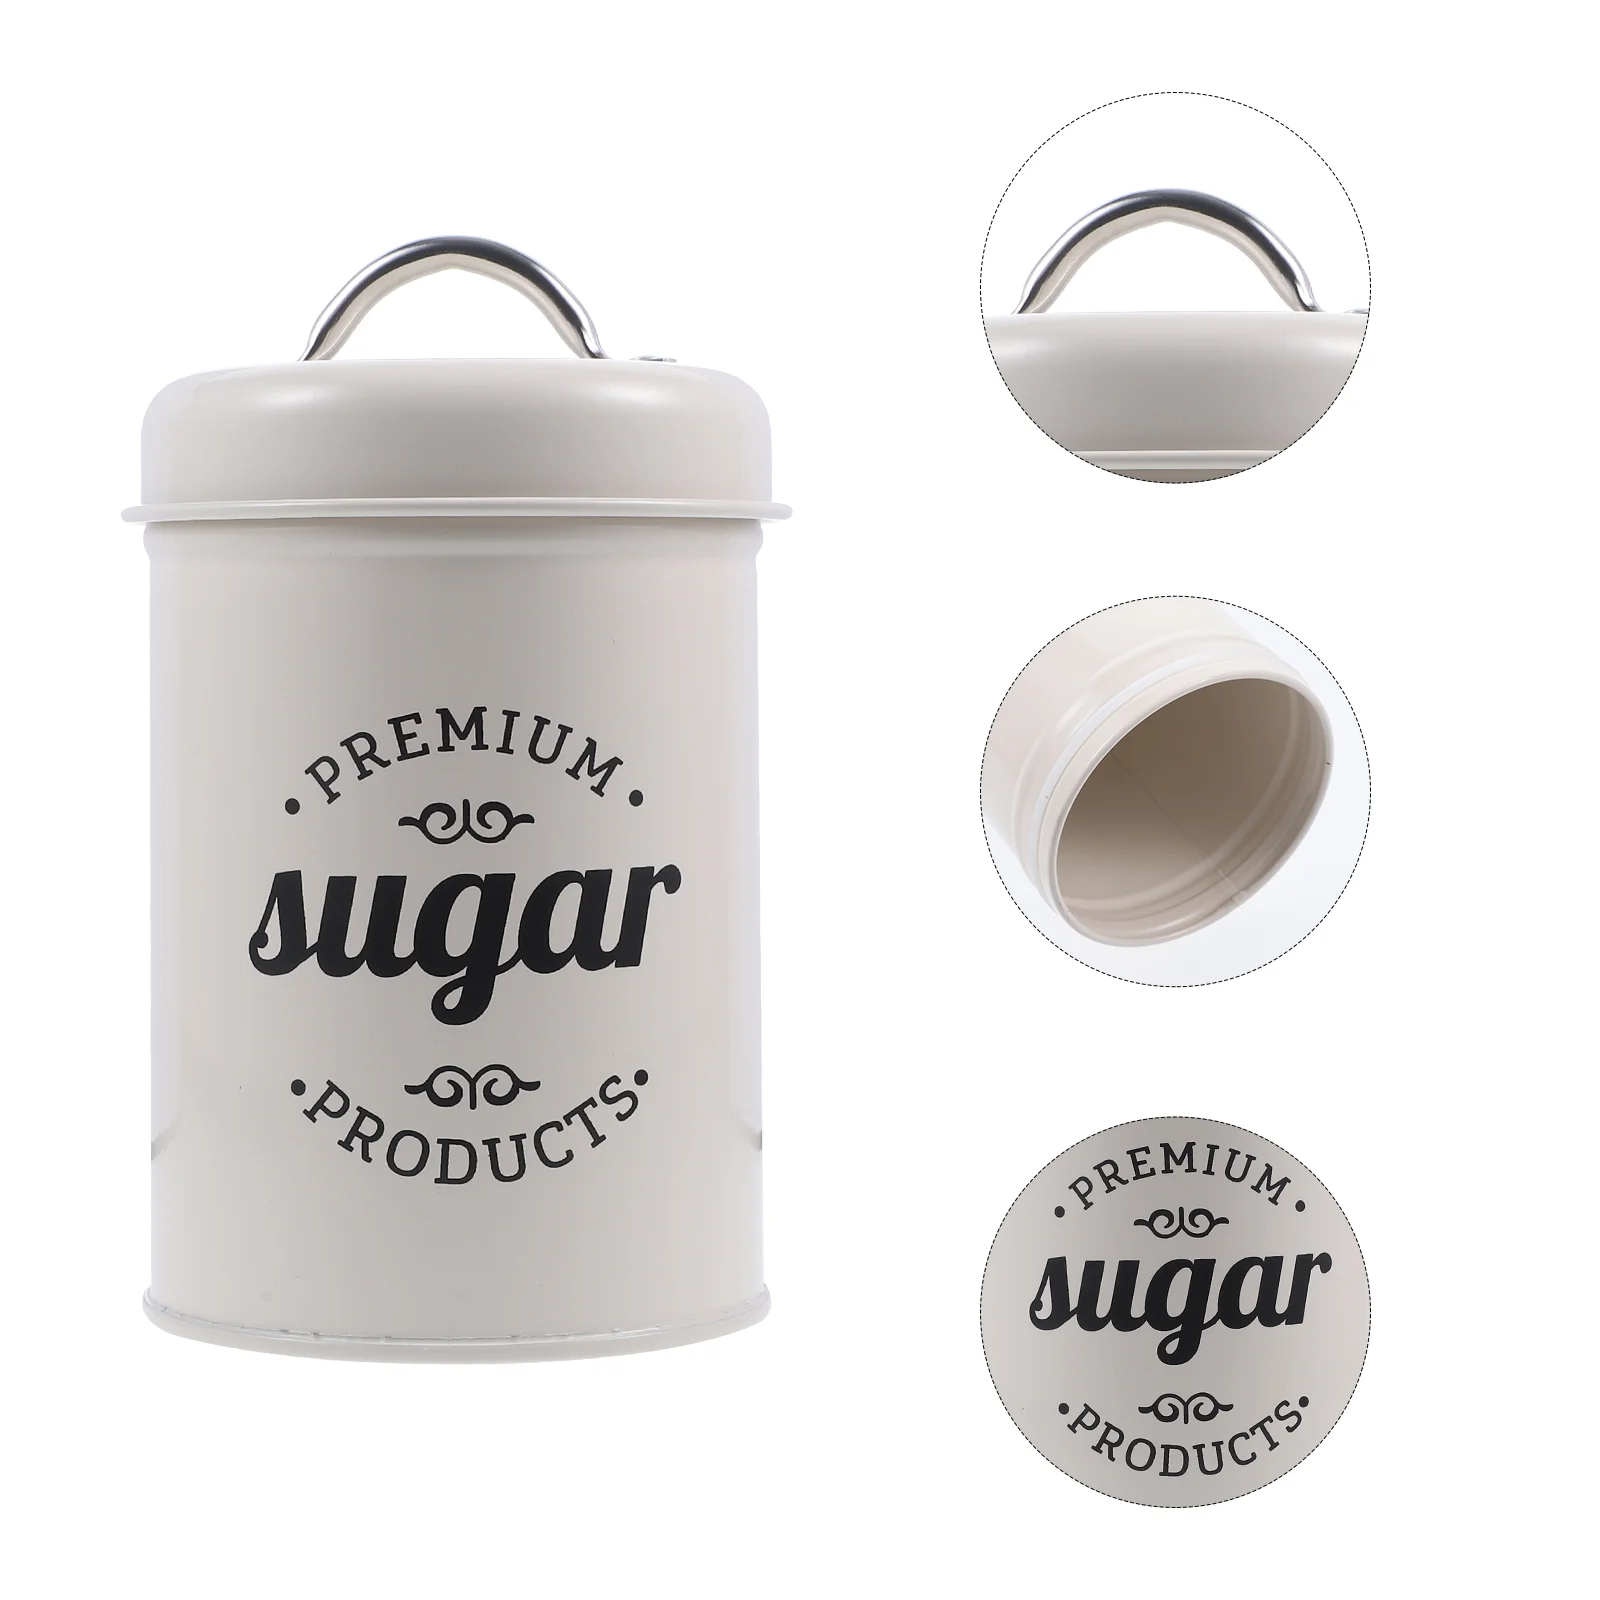 

Storage Metal Tea Canister Container Jar Kitchen Tin Containers Box Sugar Canisters Jars Flour Cookie Cereal Snacks Rice Bean